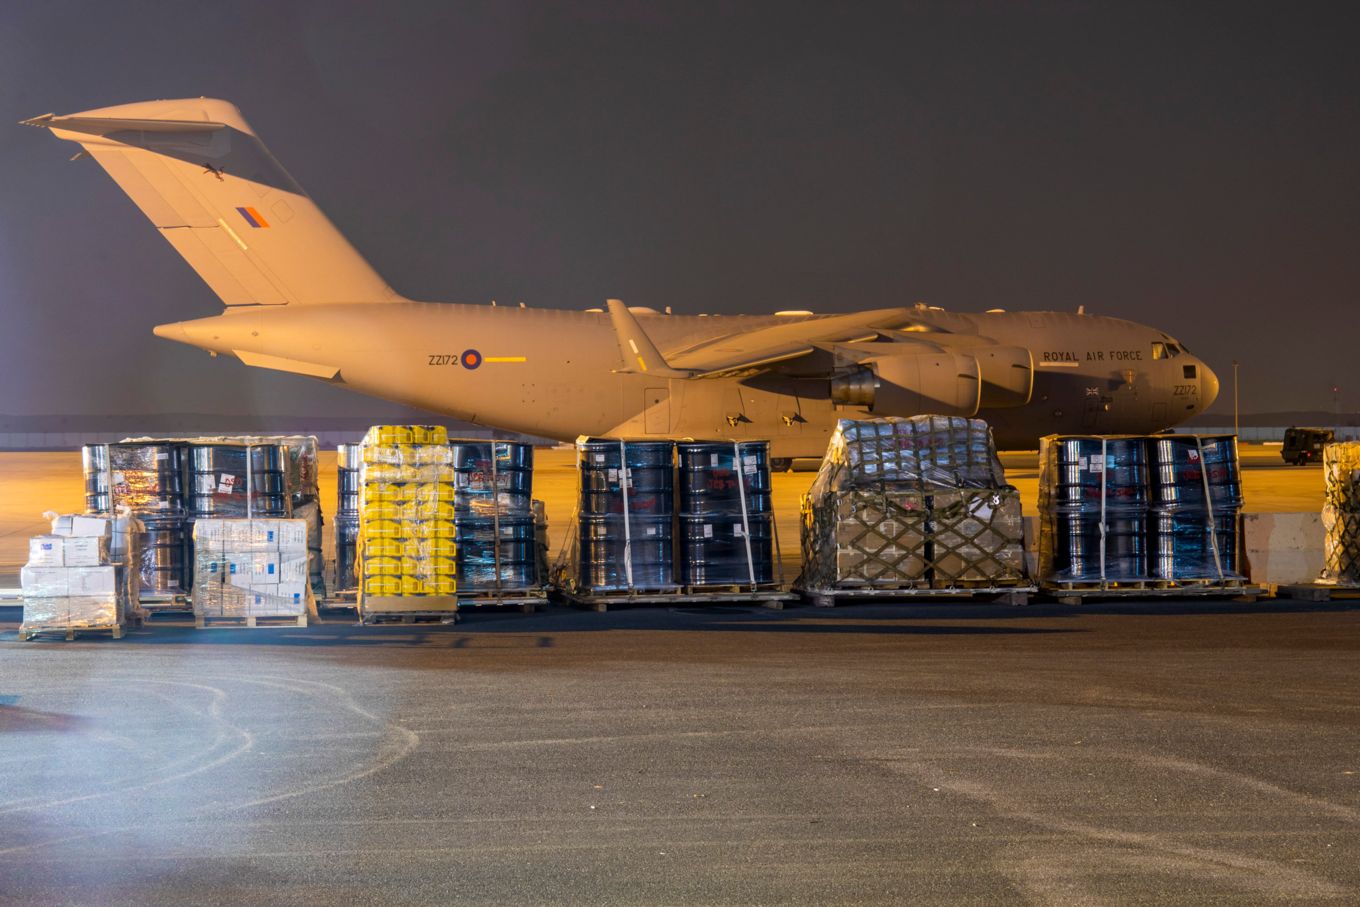 Image shows an RAF C-17 aircraft at night behind aid that has just been unloaded from it.